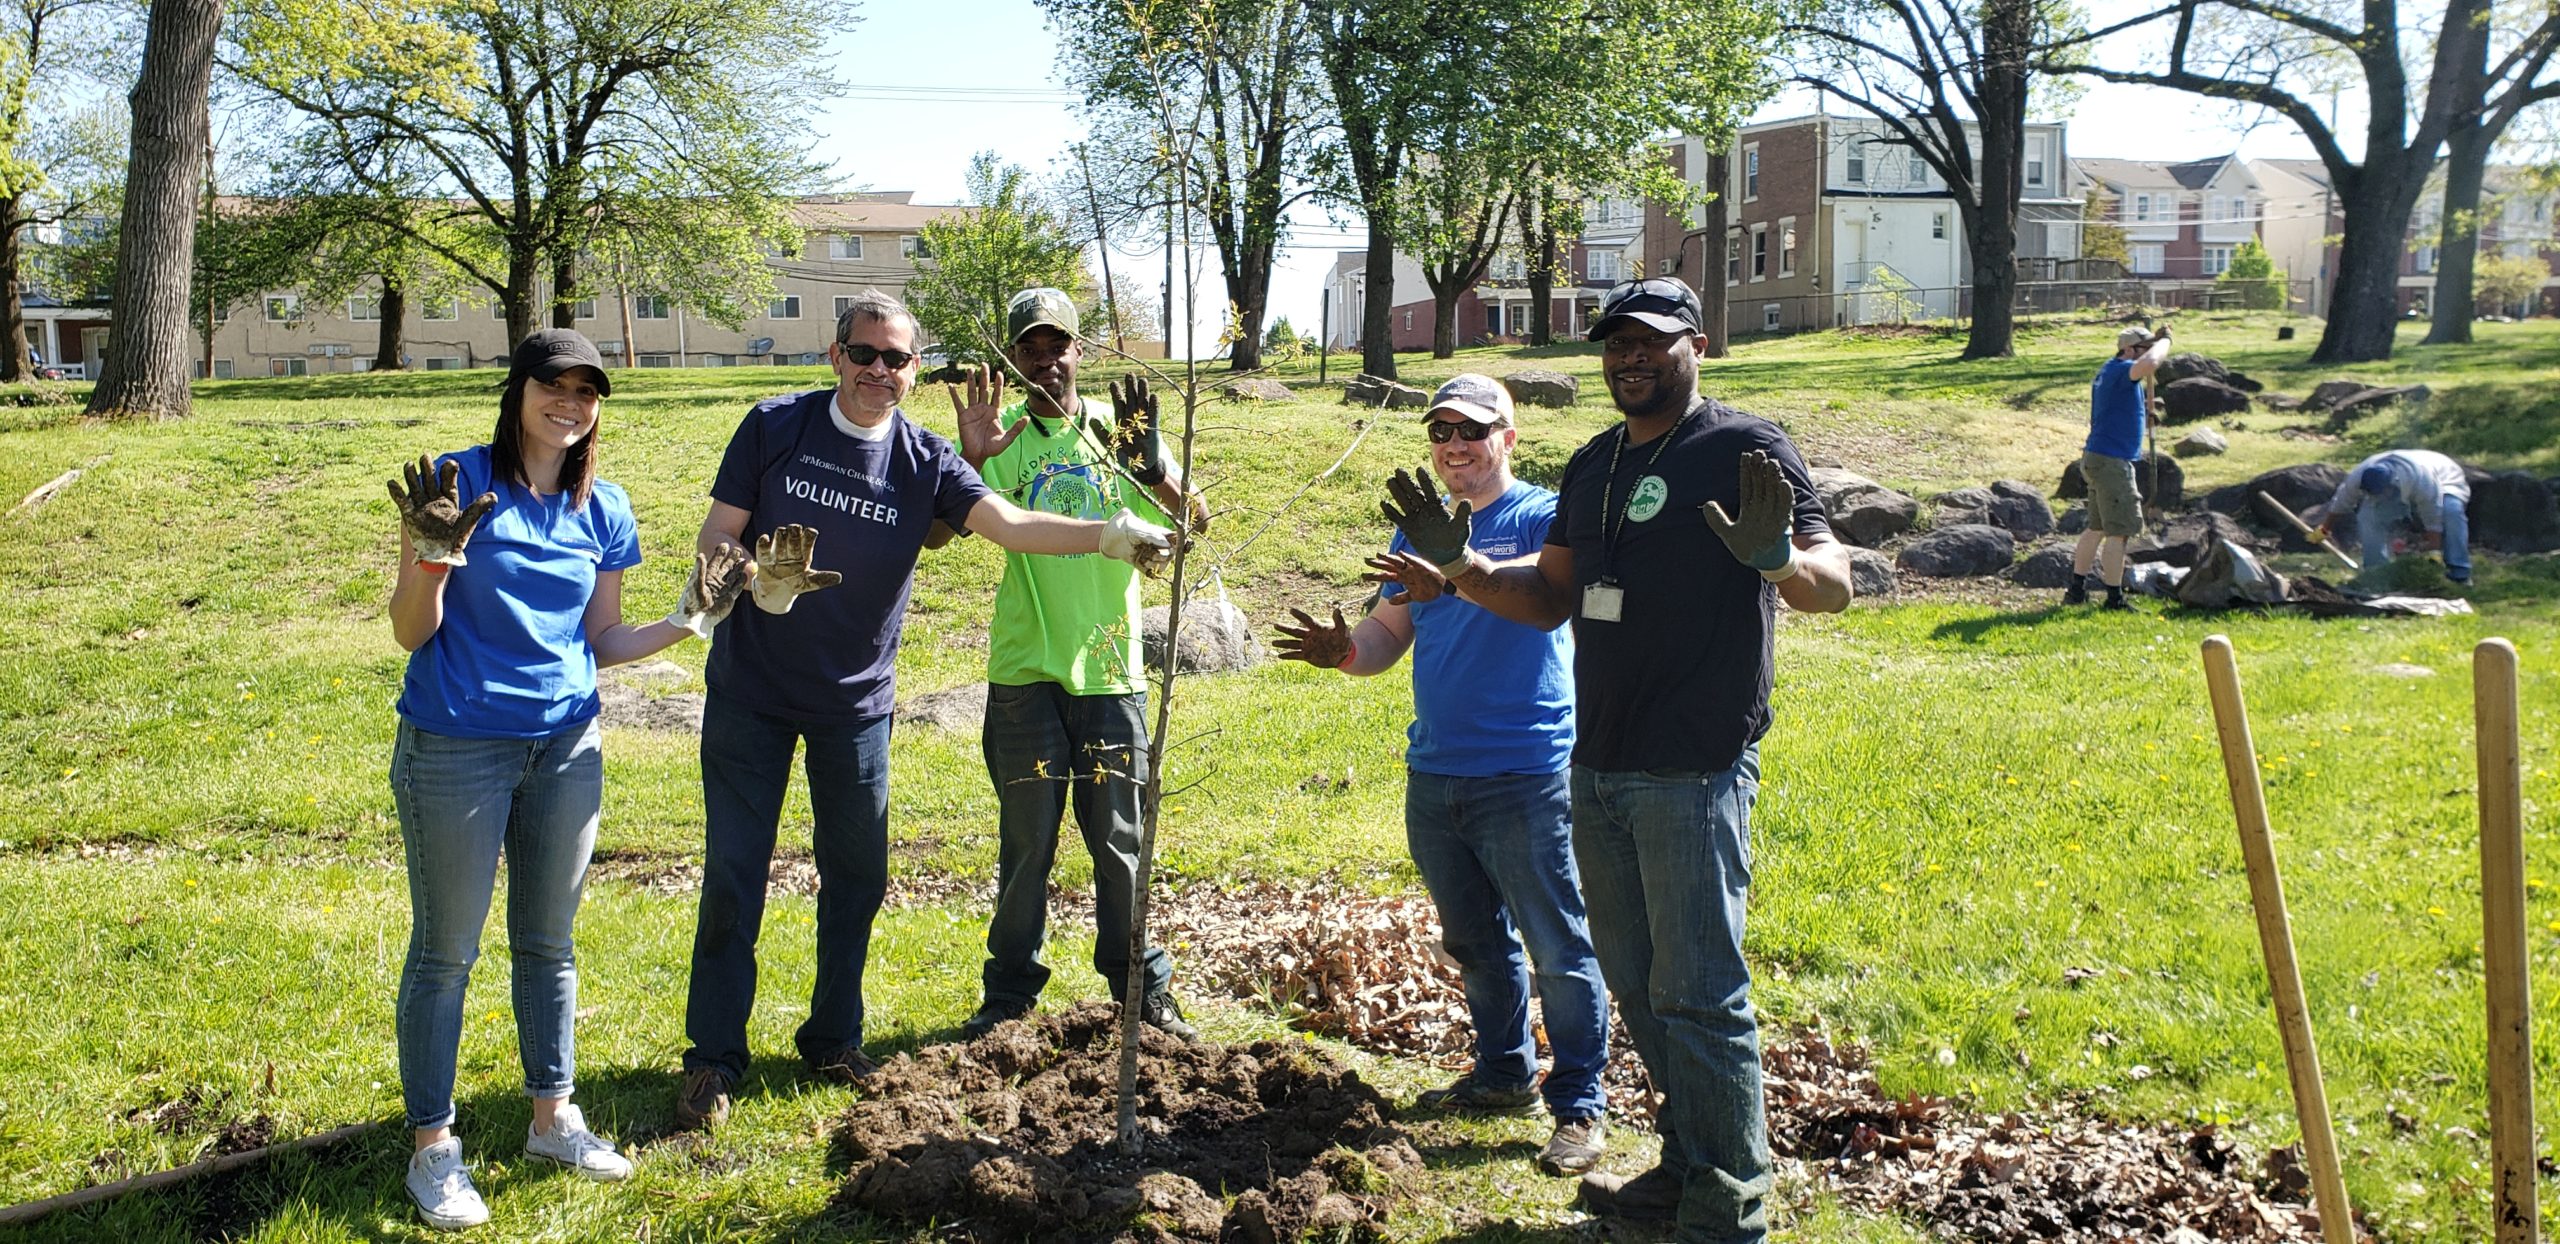 Through the generous funding of JPMorgan Chase, 50 trees were planted in Speakman Park in downtown Wilmington, Del.